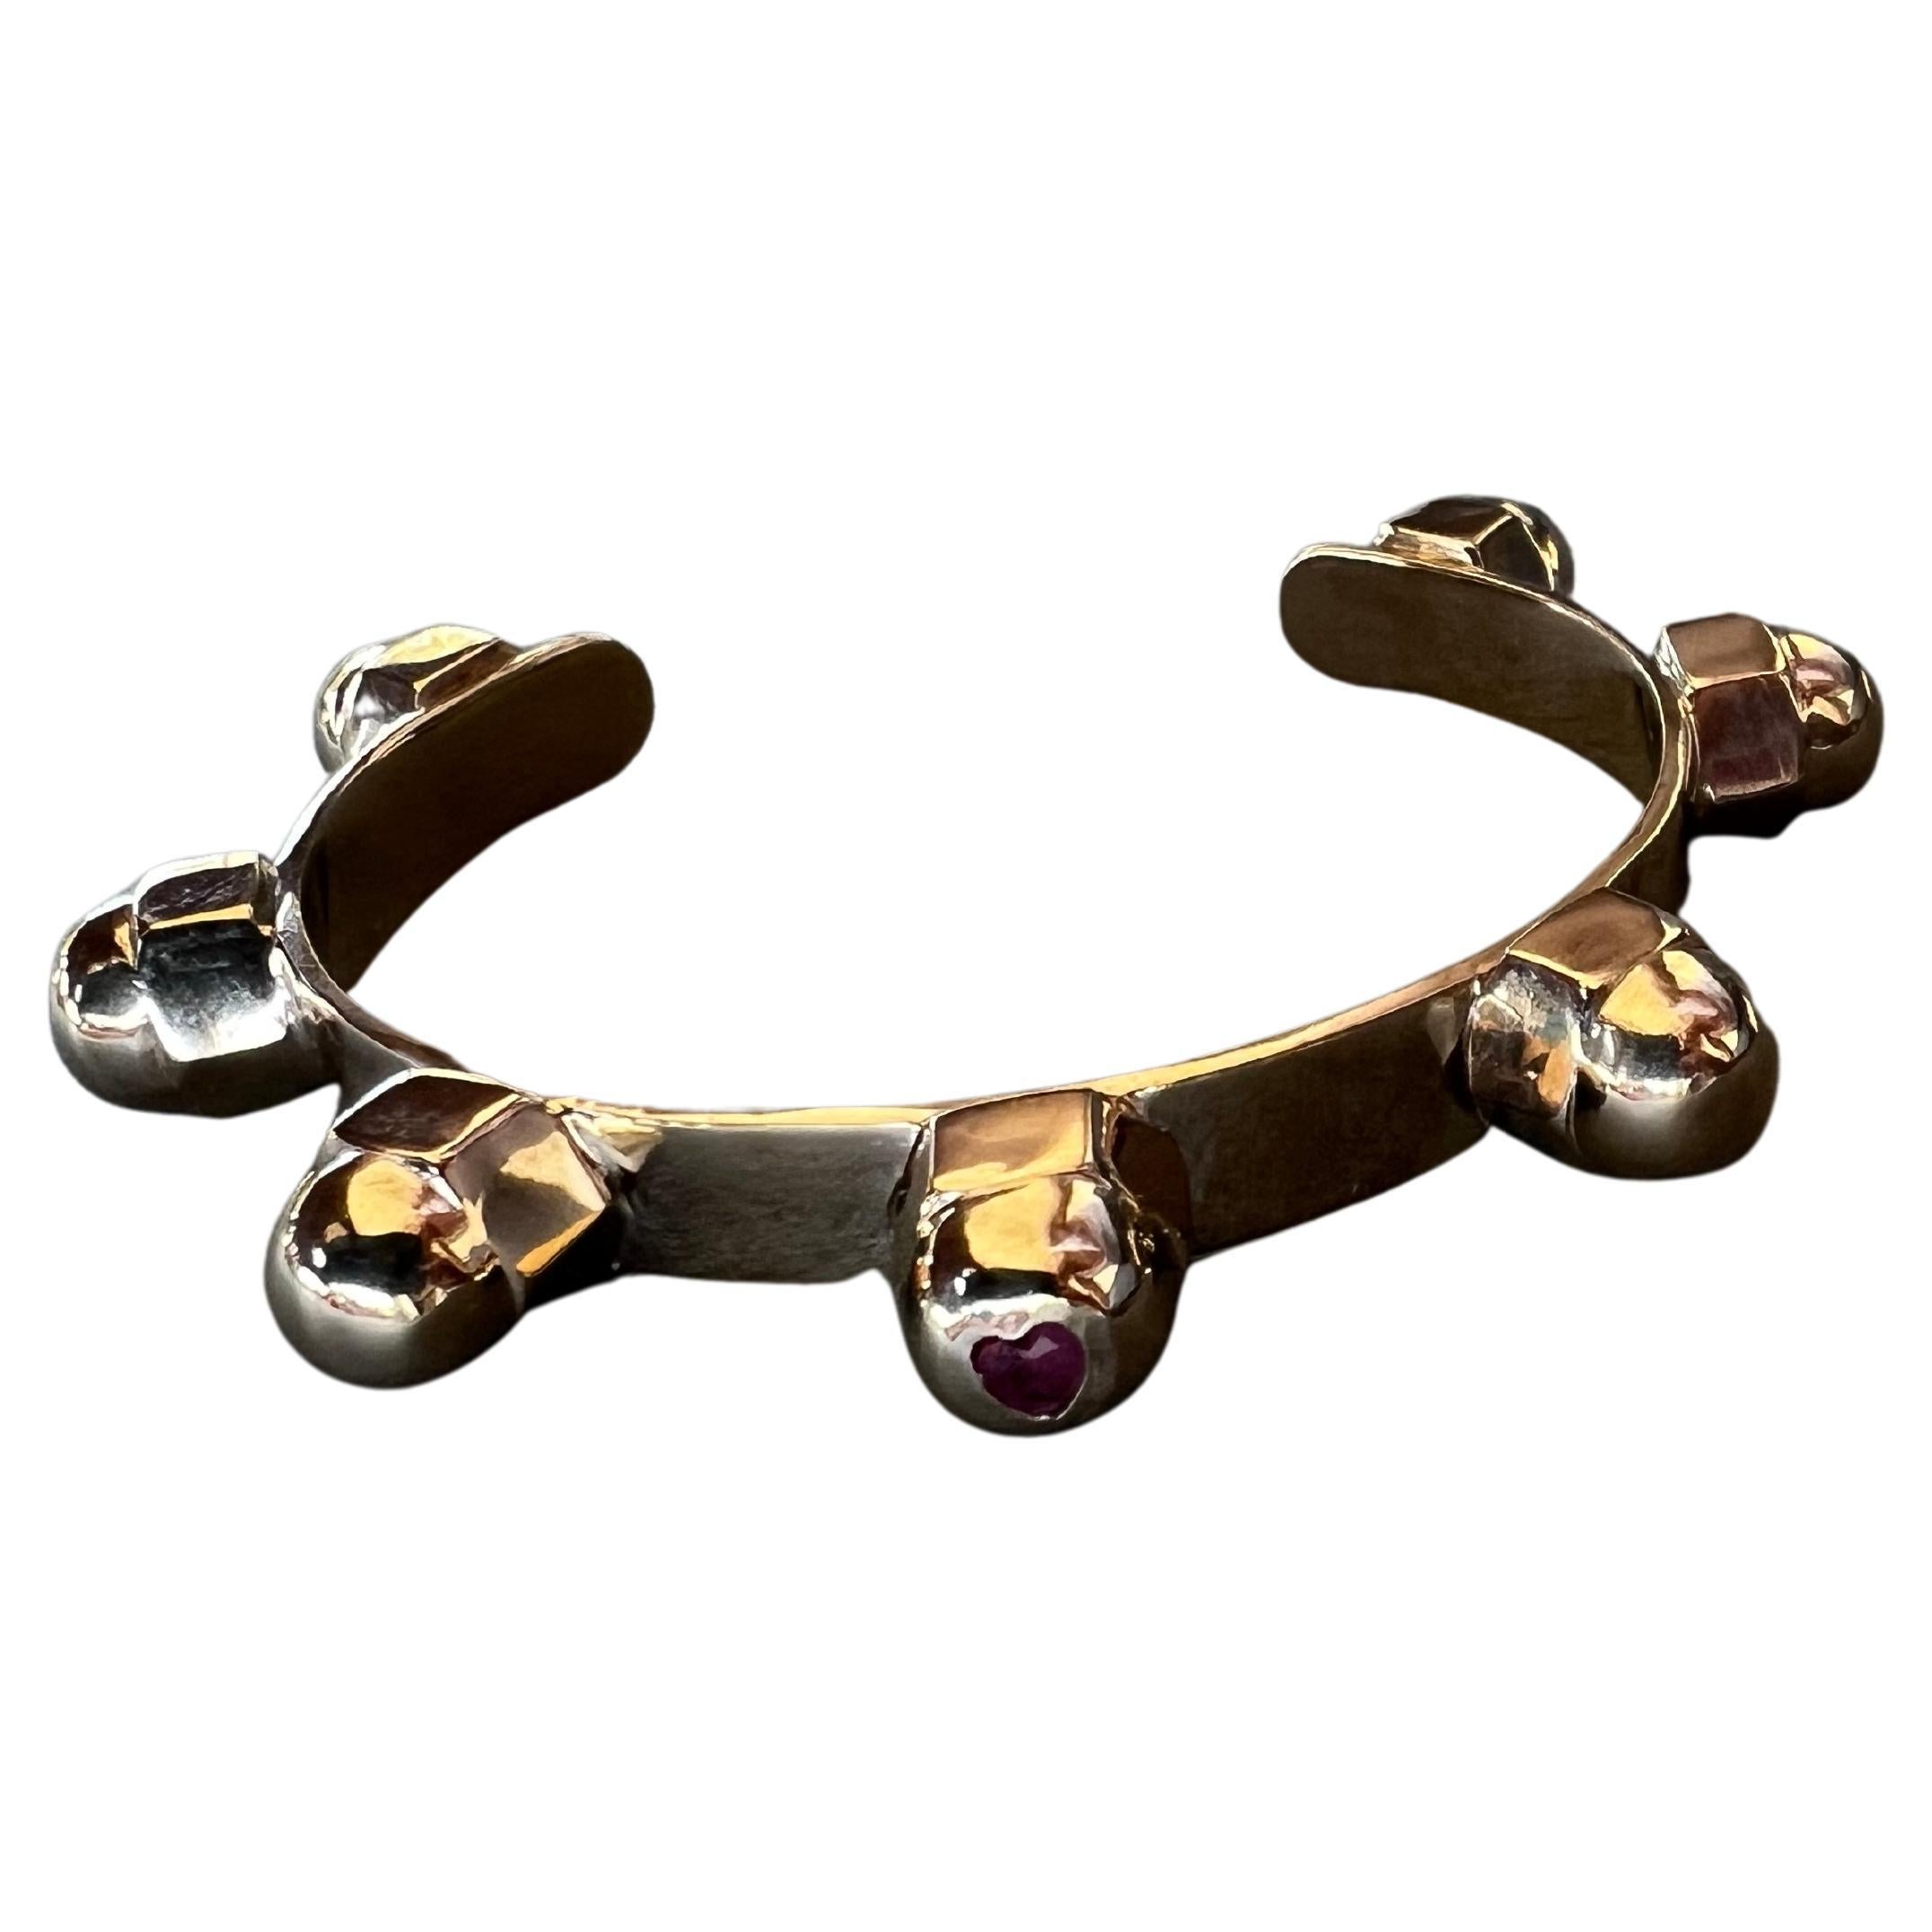 Ruby Heart Gem Cuff Bangle Bracelet 7 Studs J Dauphin

Material: Polished Bronze

Size Small/ Medium

Designer: J DAUPHIN

The Ruby gemstone is a timeless symbol of love, passion, and strength. Known for its deep red color and remarkable brilliance,